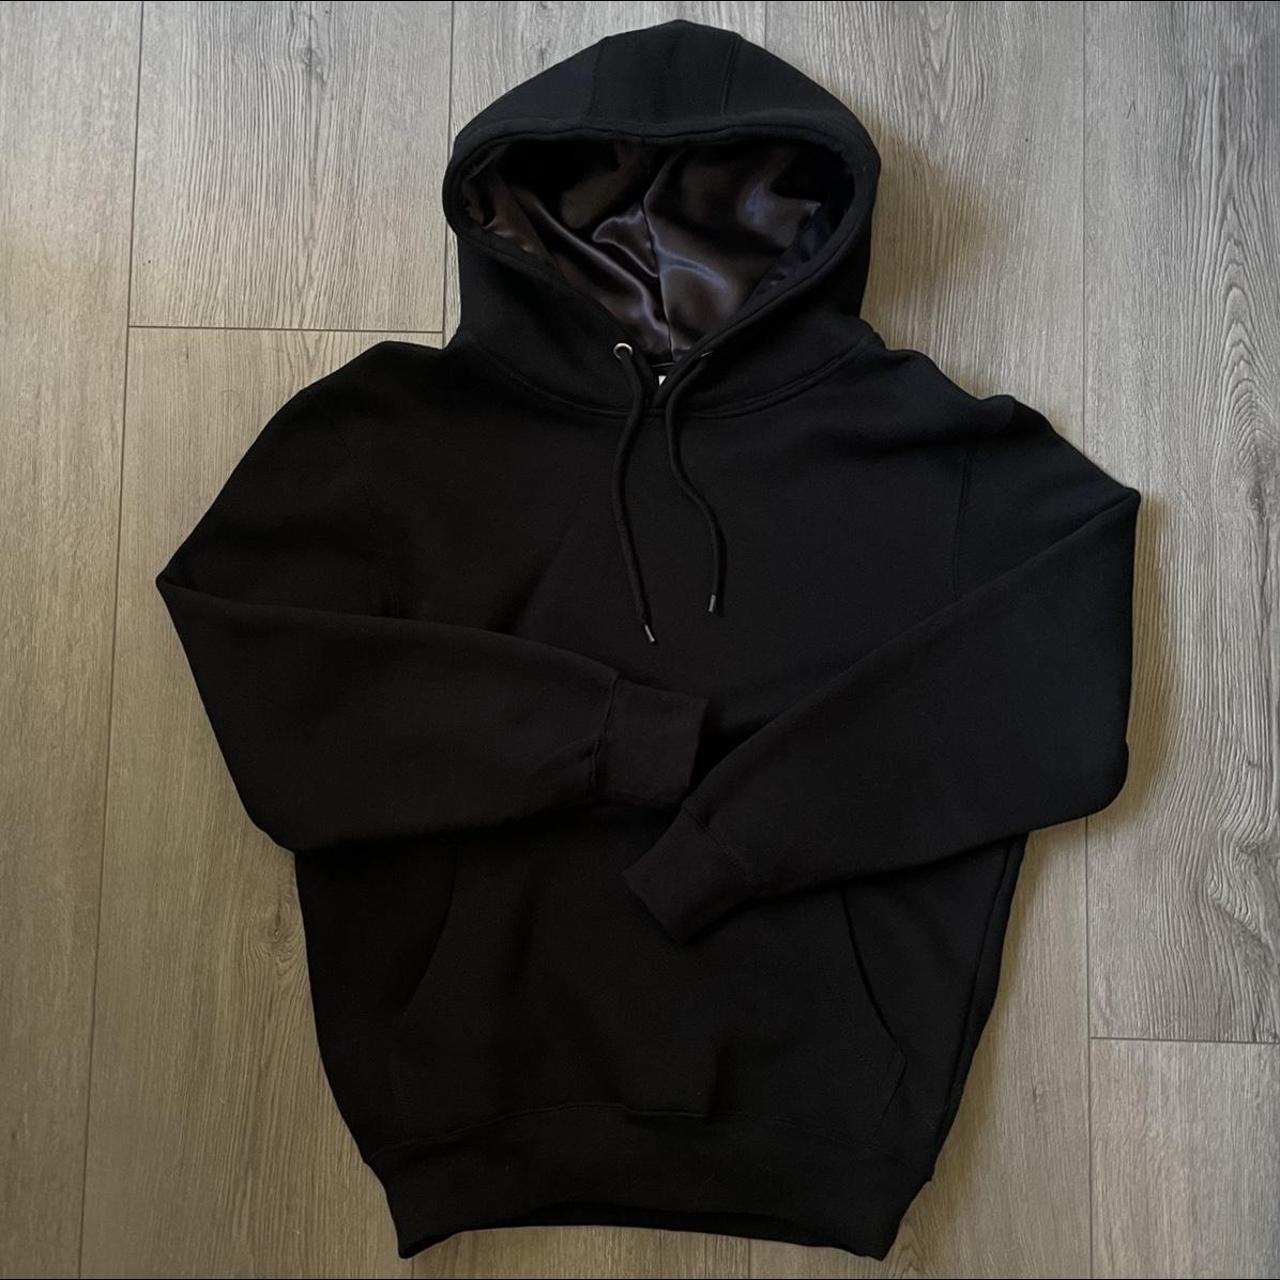 silk black hoodie 2 FOR $30 -80% cotton -available... - Depop